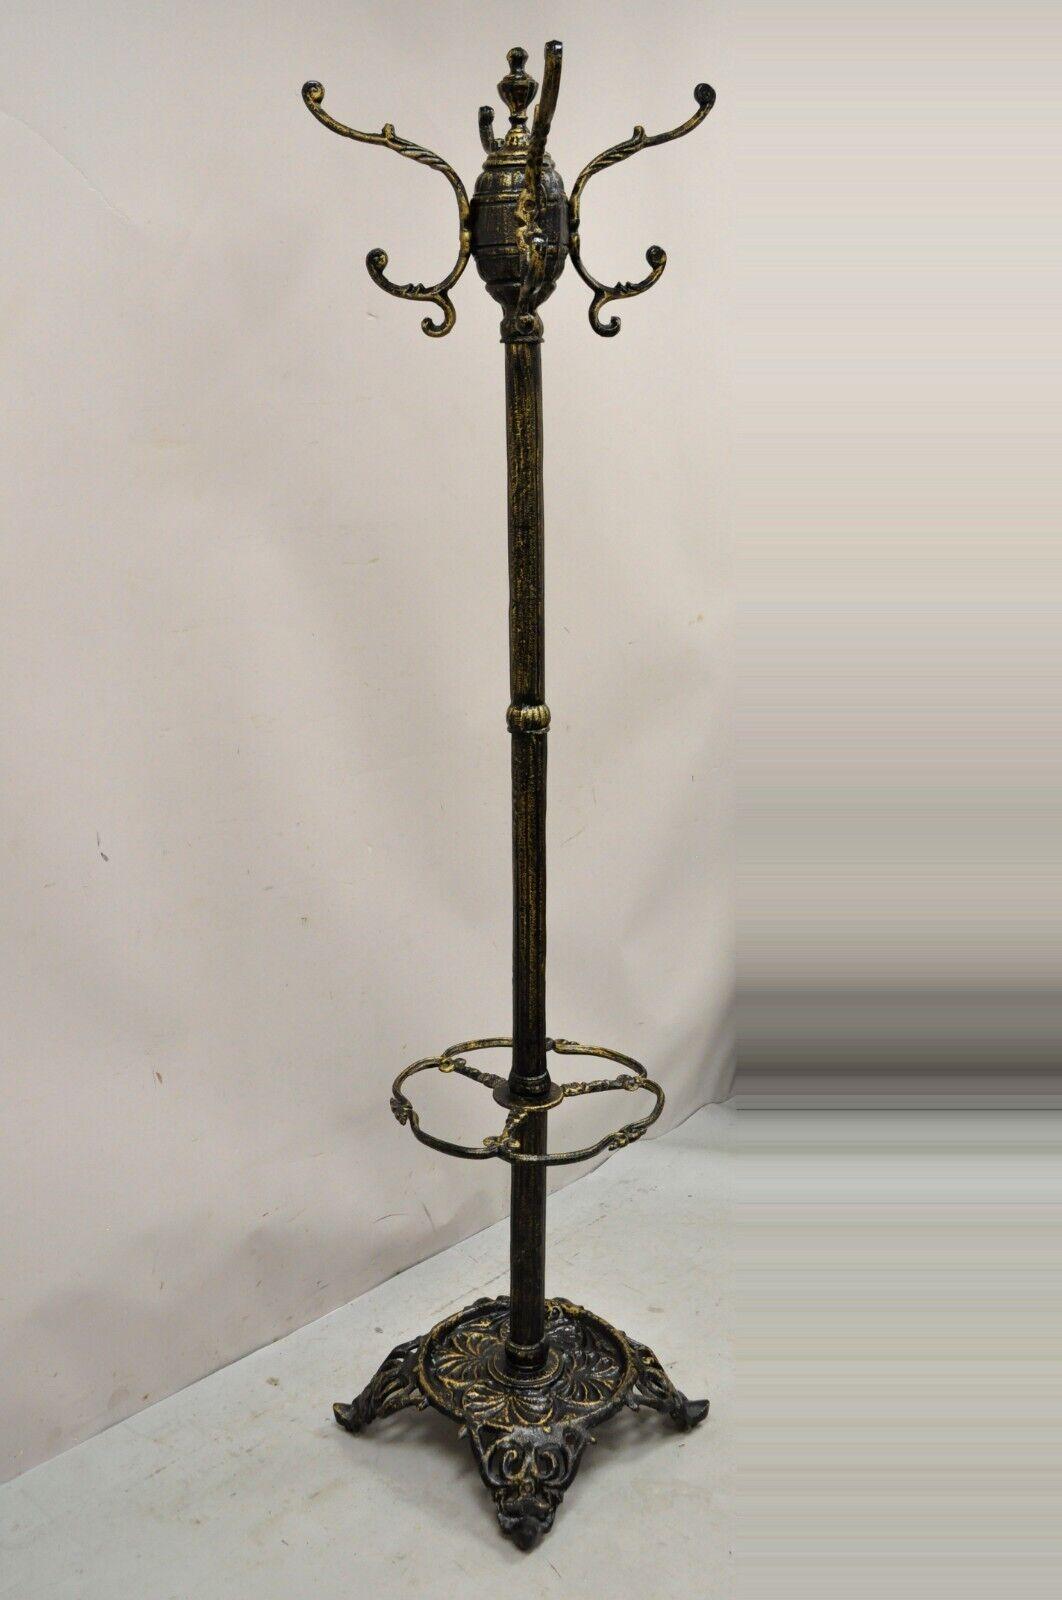 Heavy Cast Iron Victorian Style black coat tree umbrella hall stand. Item features a heavy cast iron frame, 4 double hooks (8 hooks total), distressed finish, approx. 70 lbs. Circa Late 20th Century - Early 21st Century. Measurements: 76